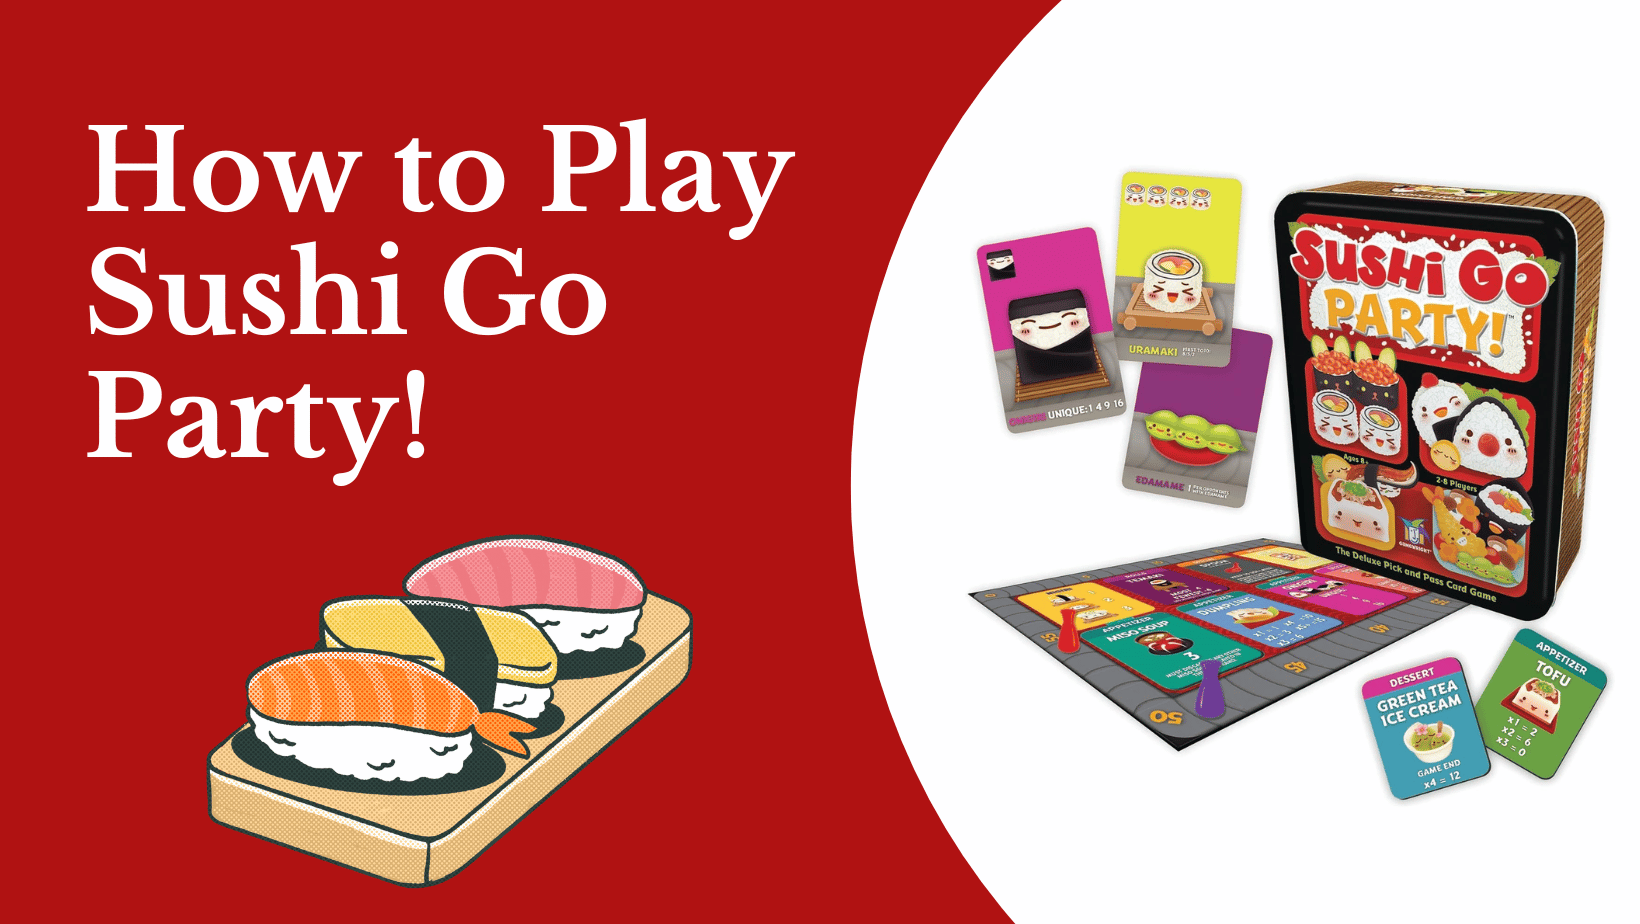 How to play sushi go party